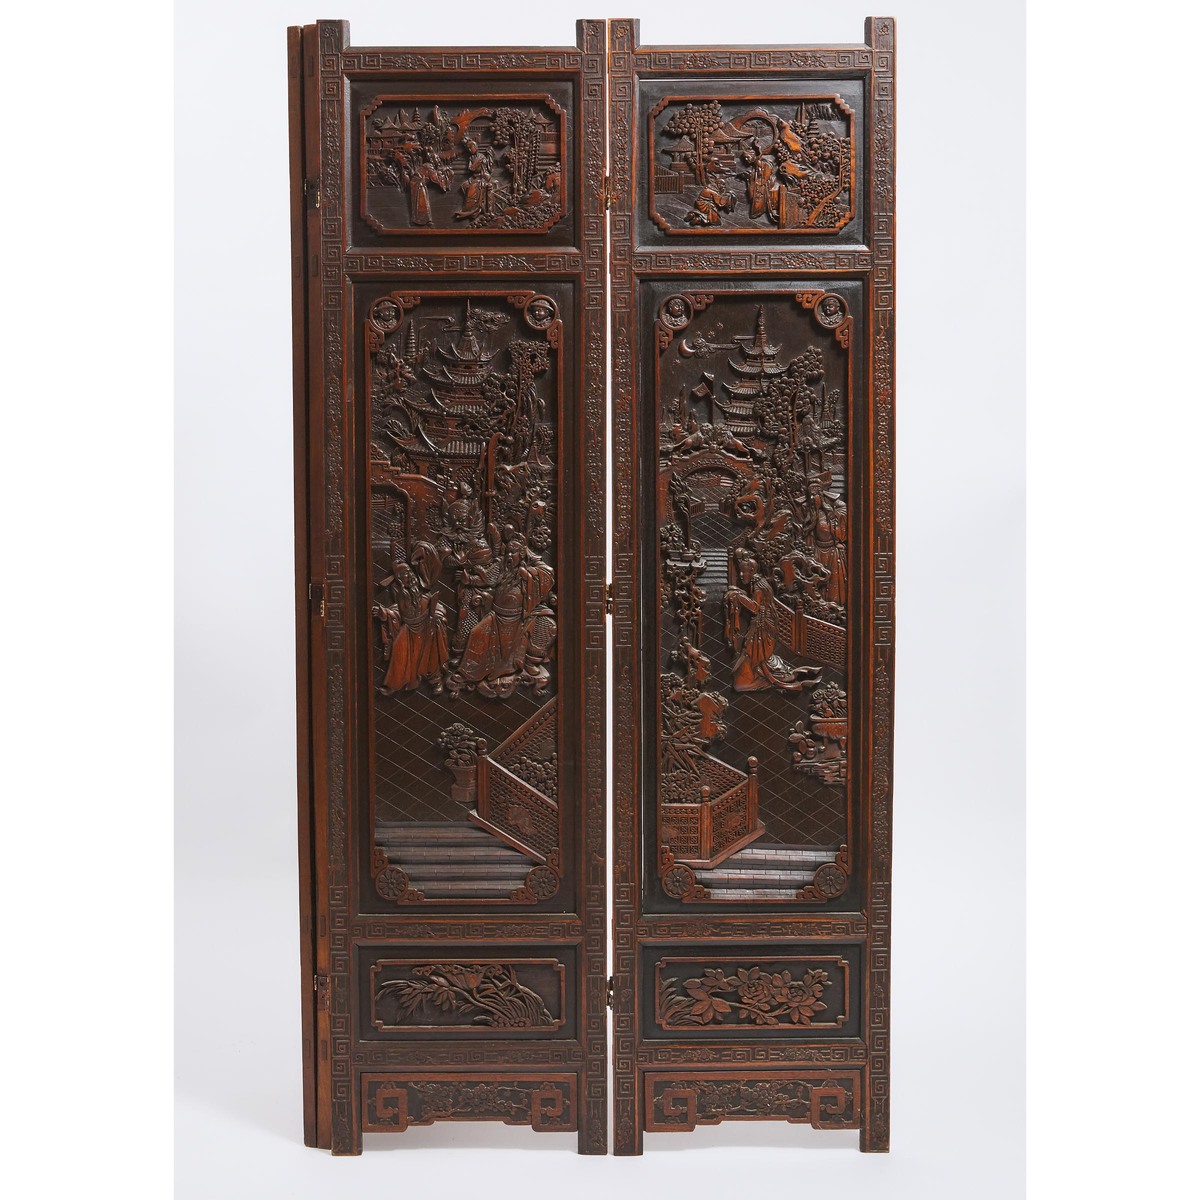 A Chinese Carved Wood 'Three Kingdoms' Four-Panel Floor Screen, Mid 20th Century, 民国 木雕人物故事纹屏风四扇, he - Image 3 of 4